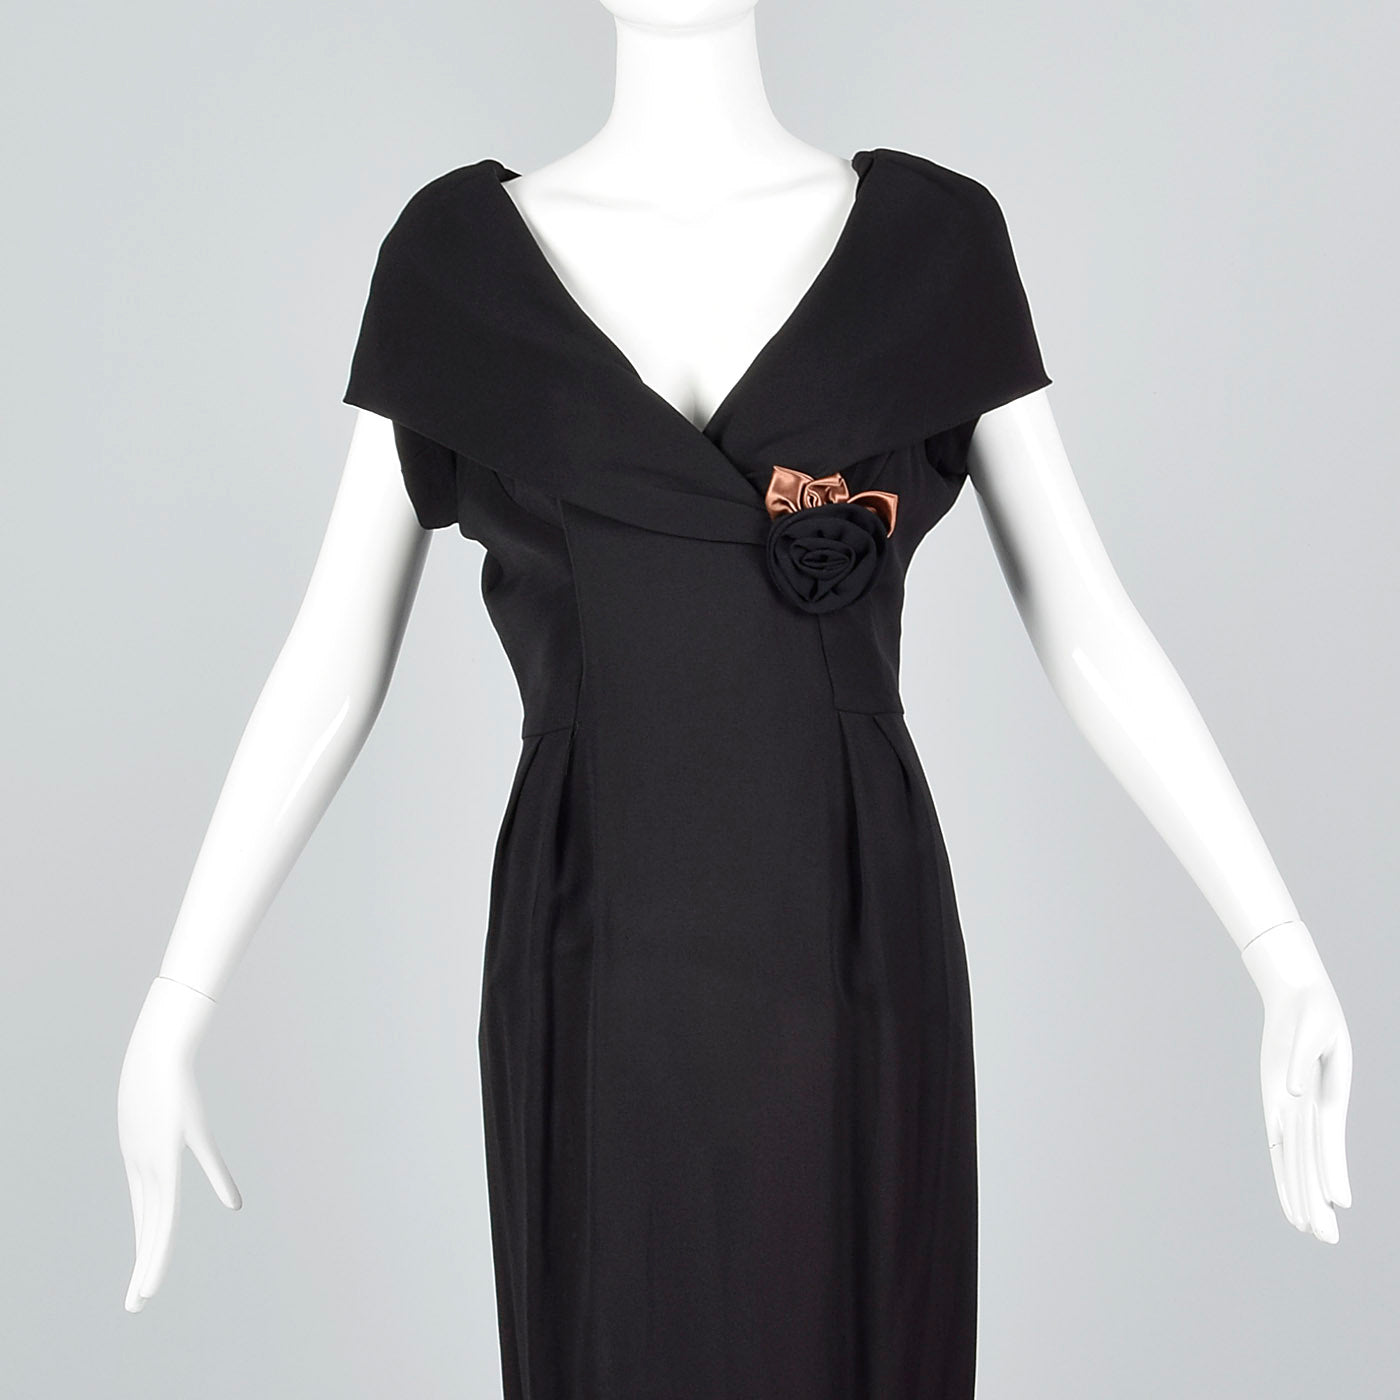 1950s Black Dress with Shawl Collar and Low Cut Front